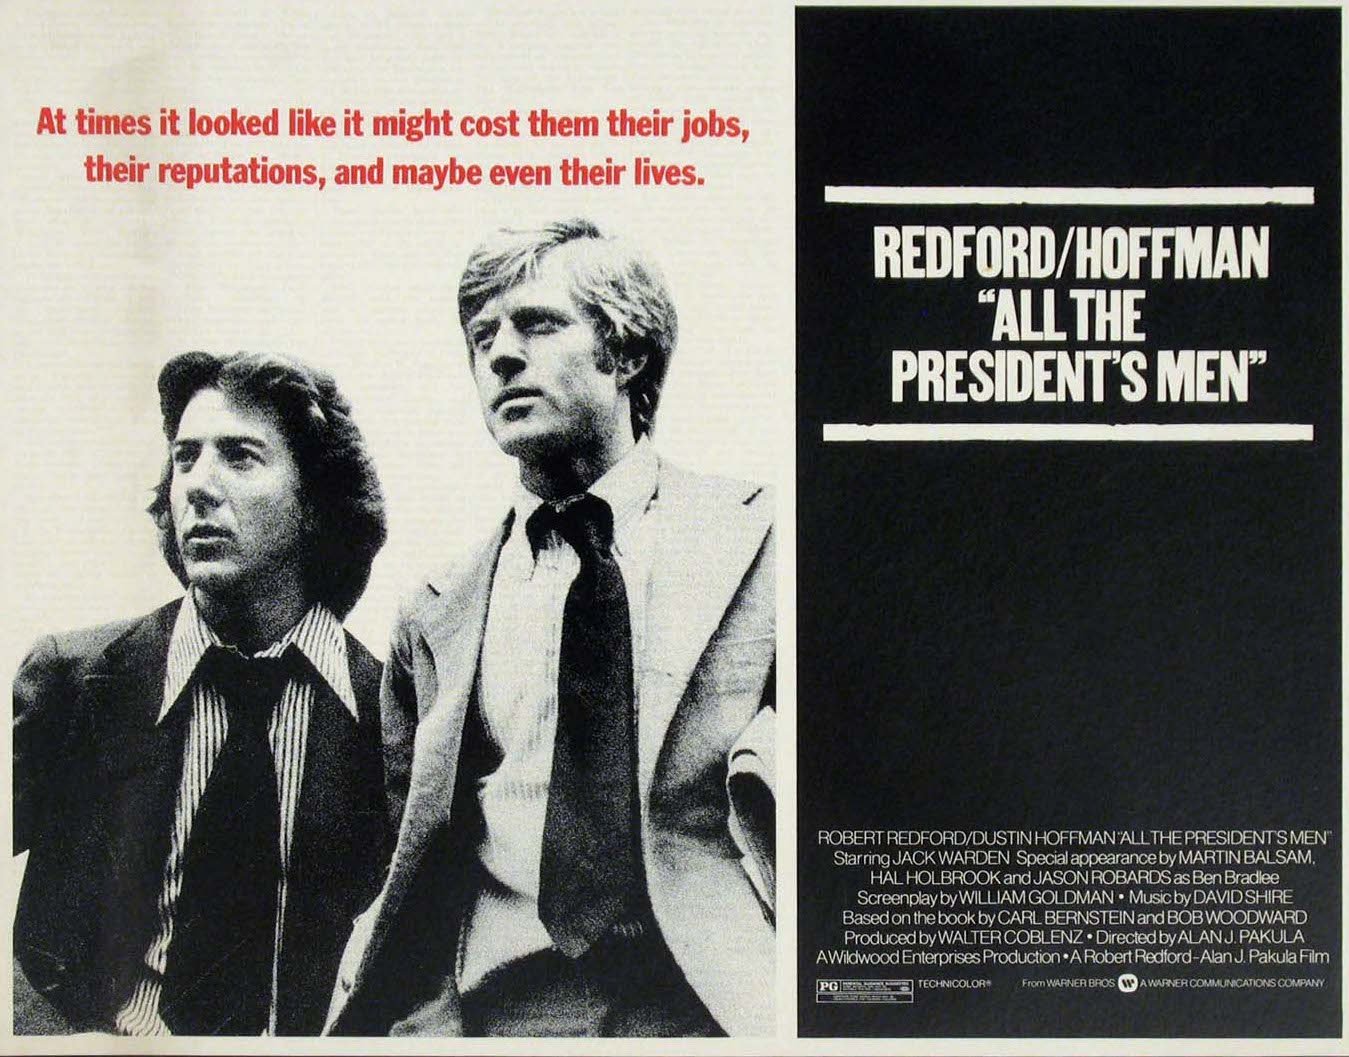 40th anniversary of Watergate scandal film All the President’s Men